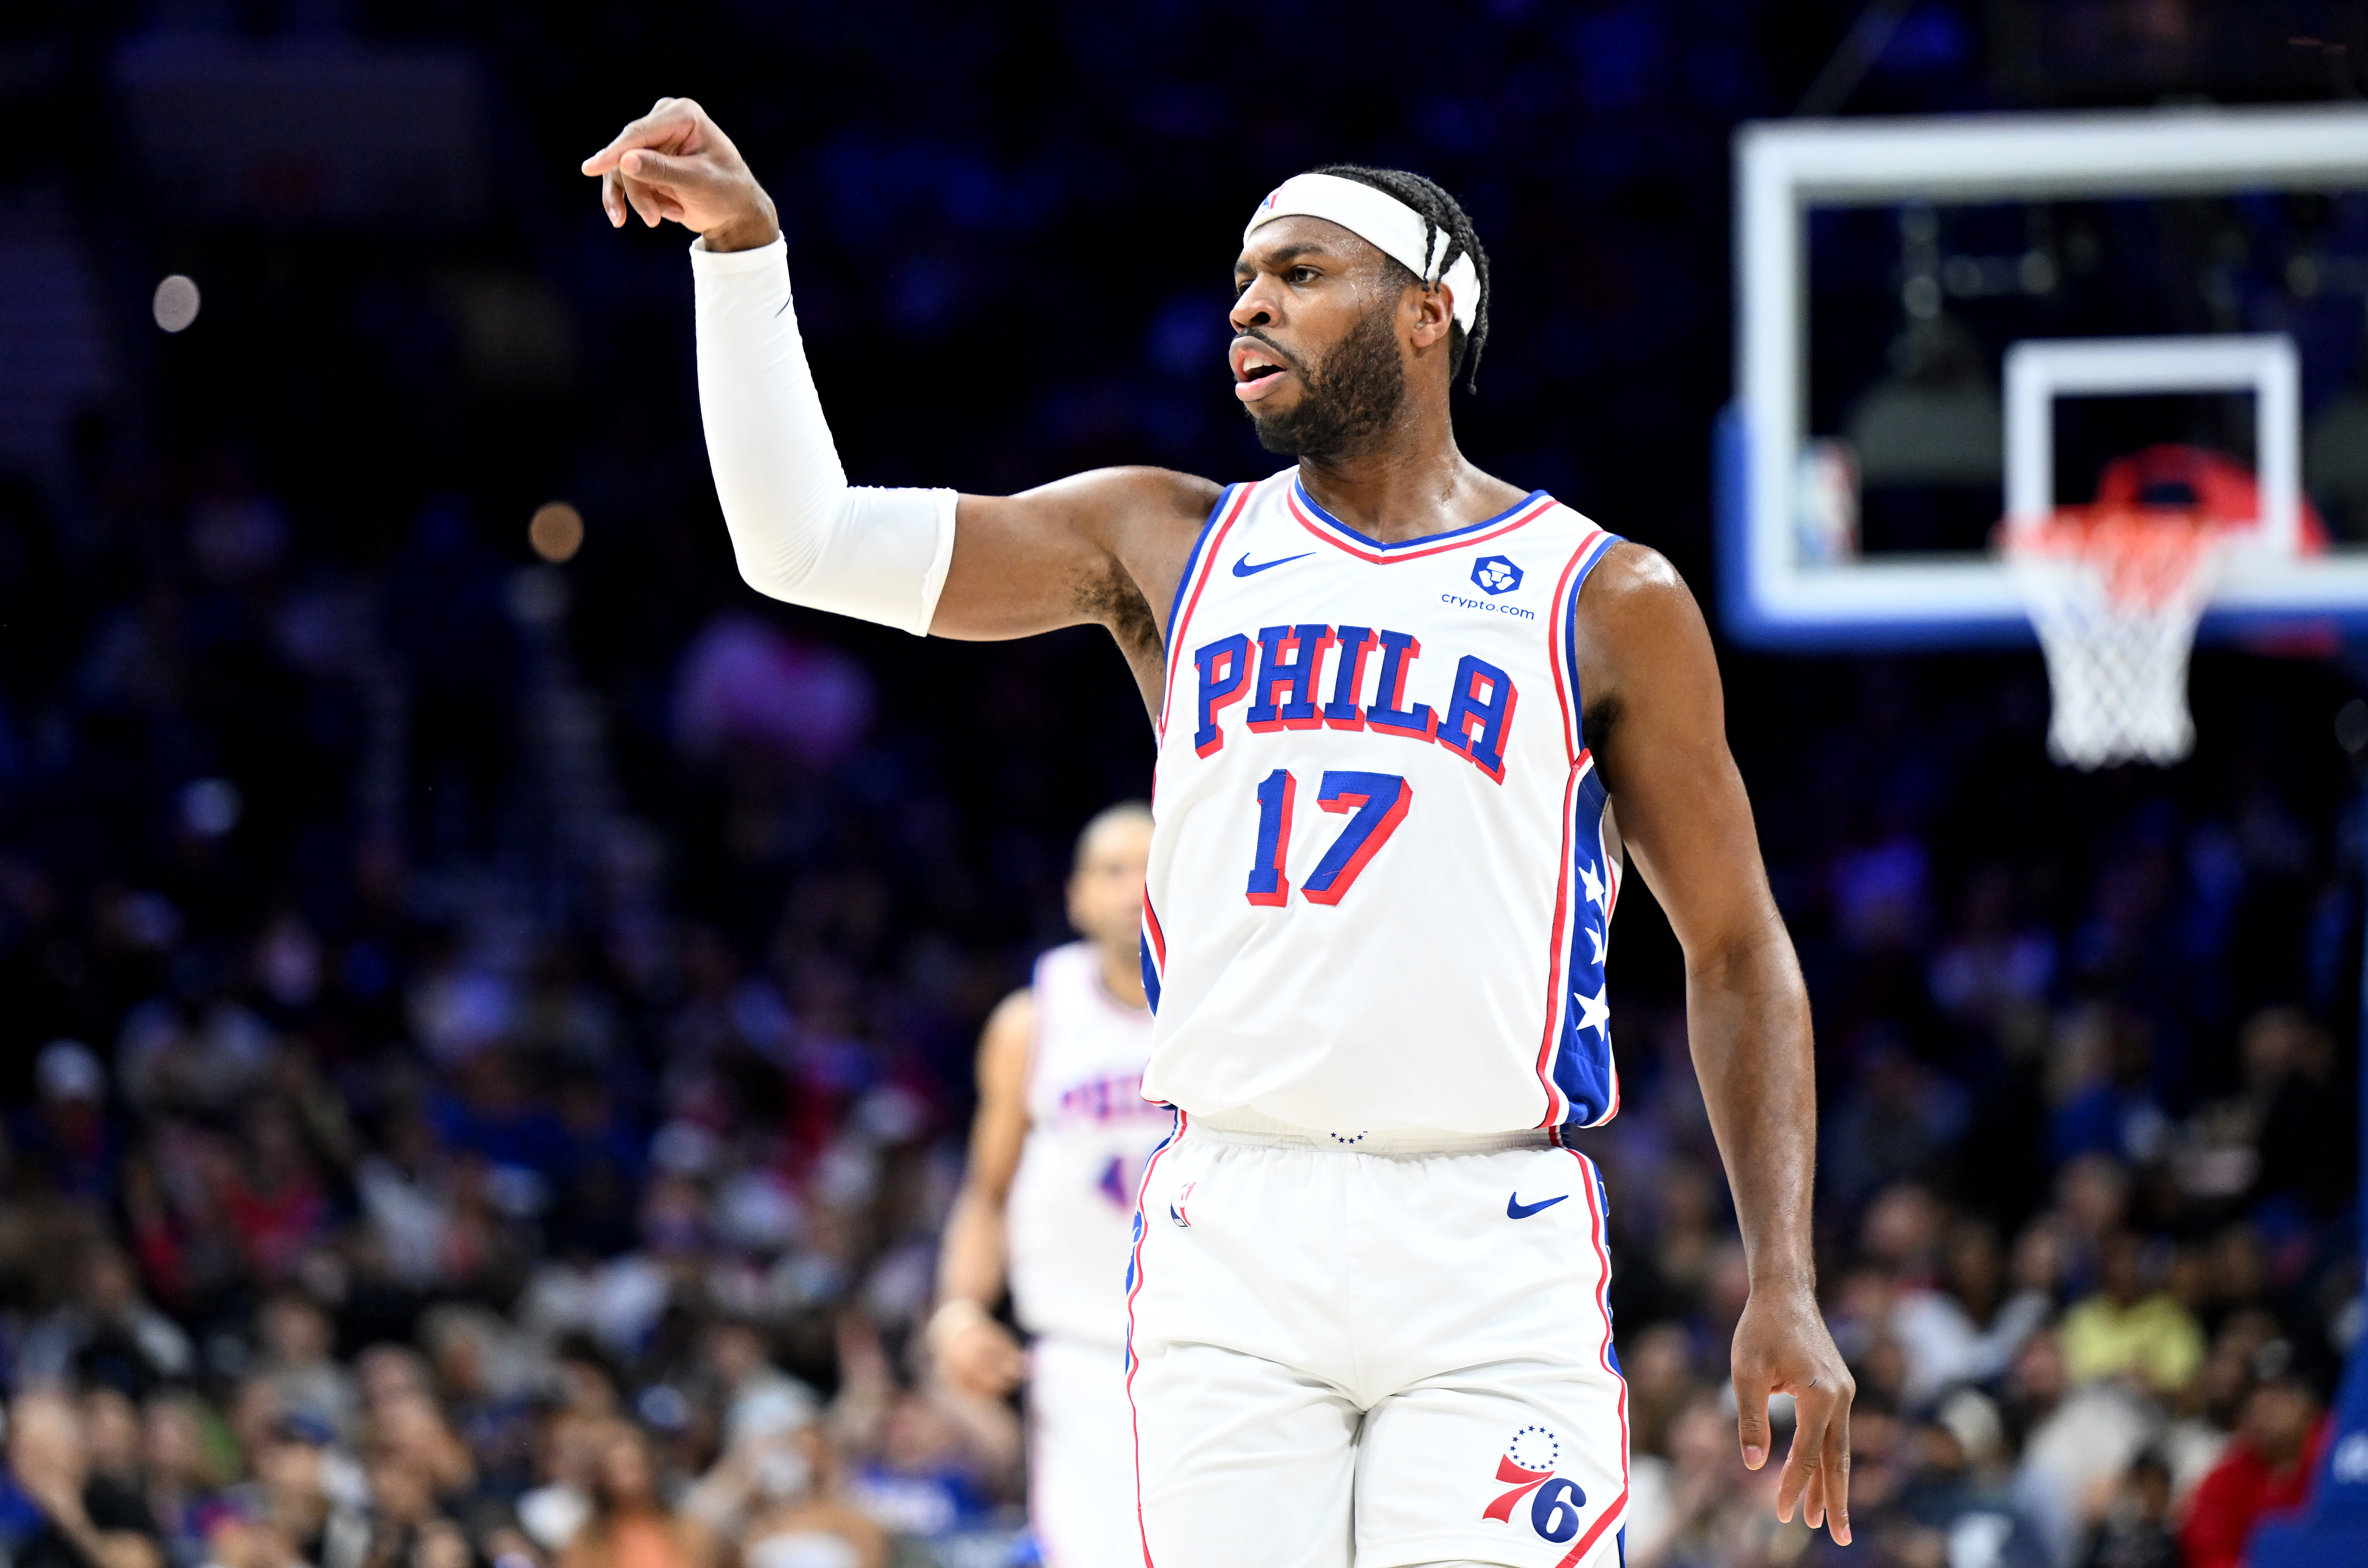 Golden State acquires guard Buddy Hield in $21 million sign-and-trade with the 76ers